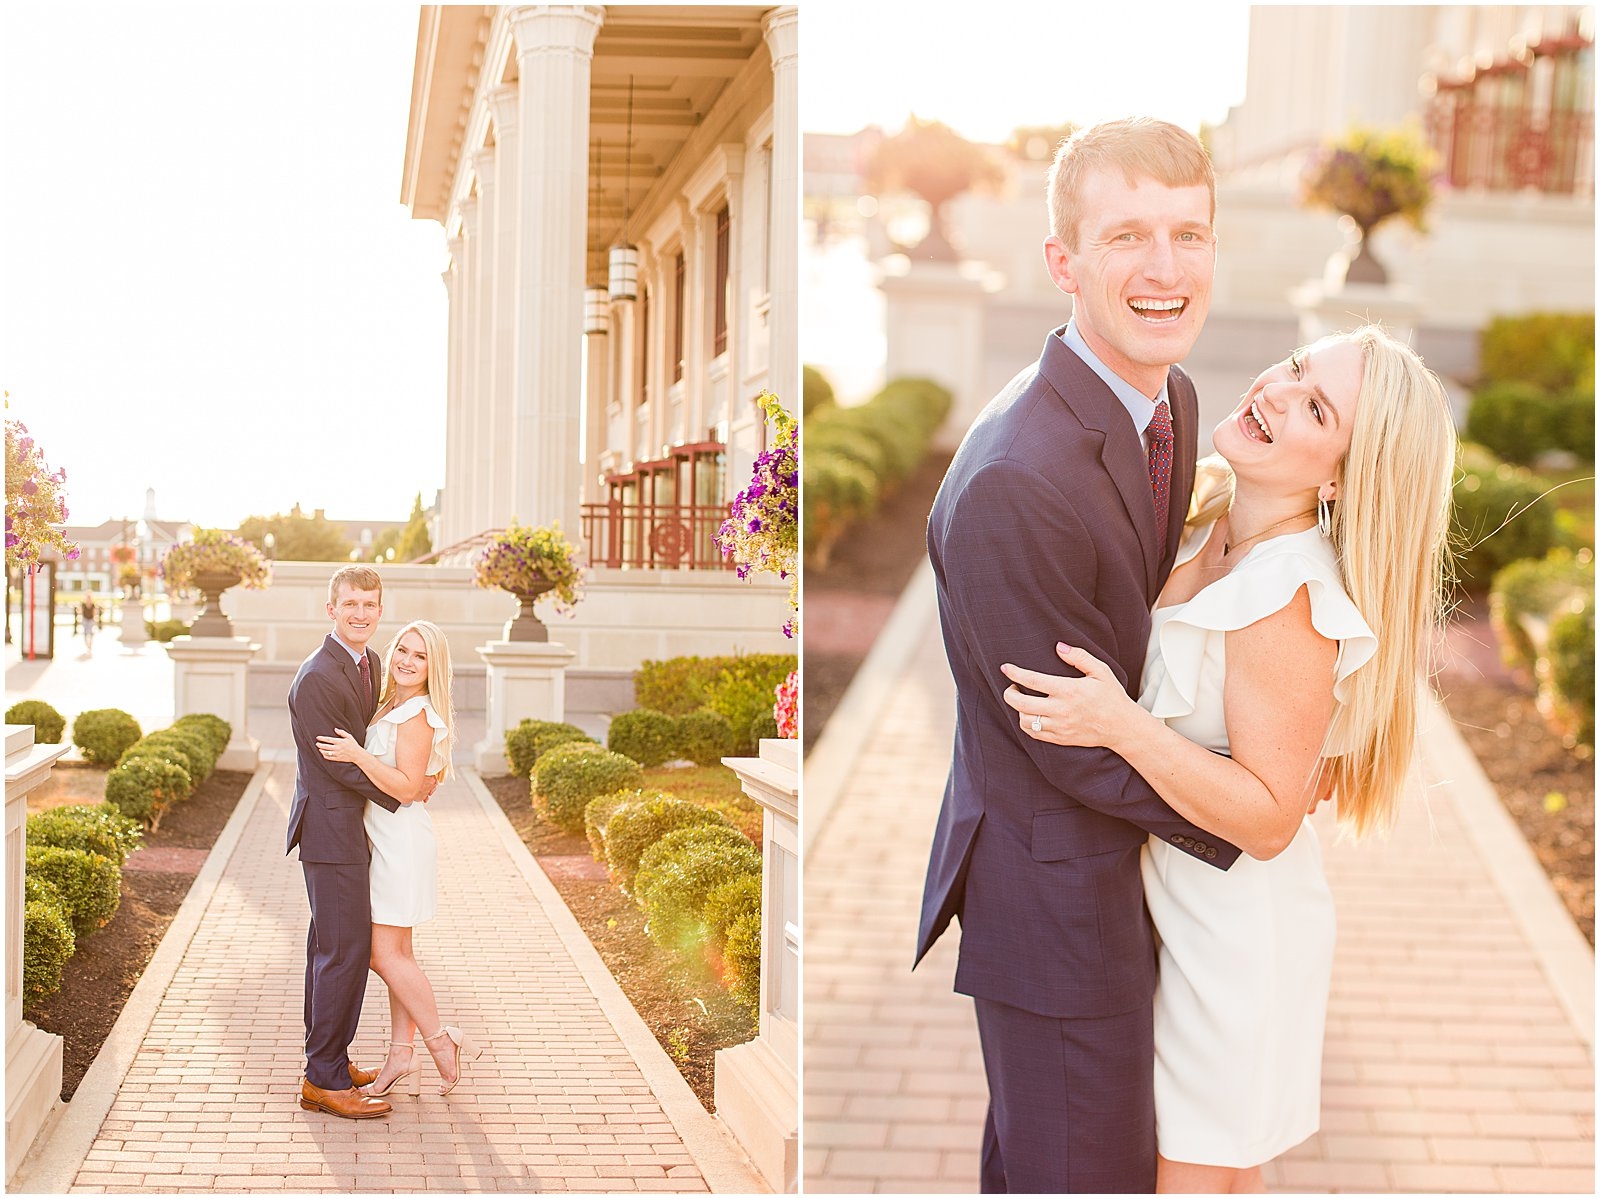 A Cute and Cuddly Engagement Session in Carmel, IN | Abbi and Josh0012.jpg